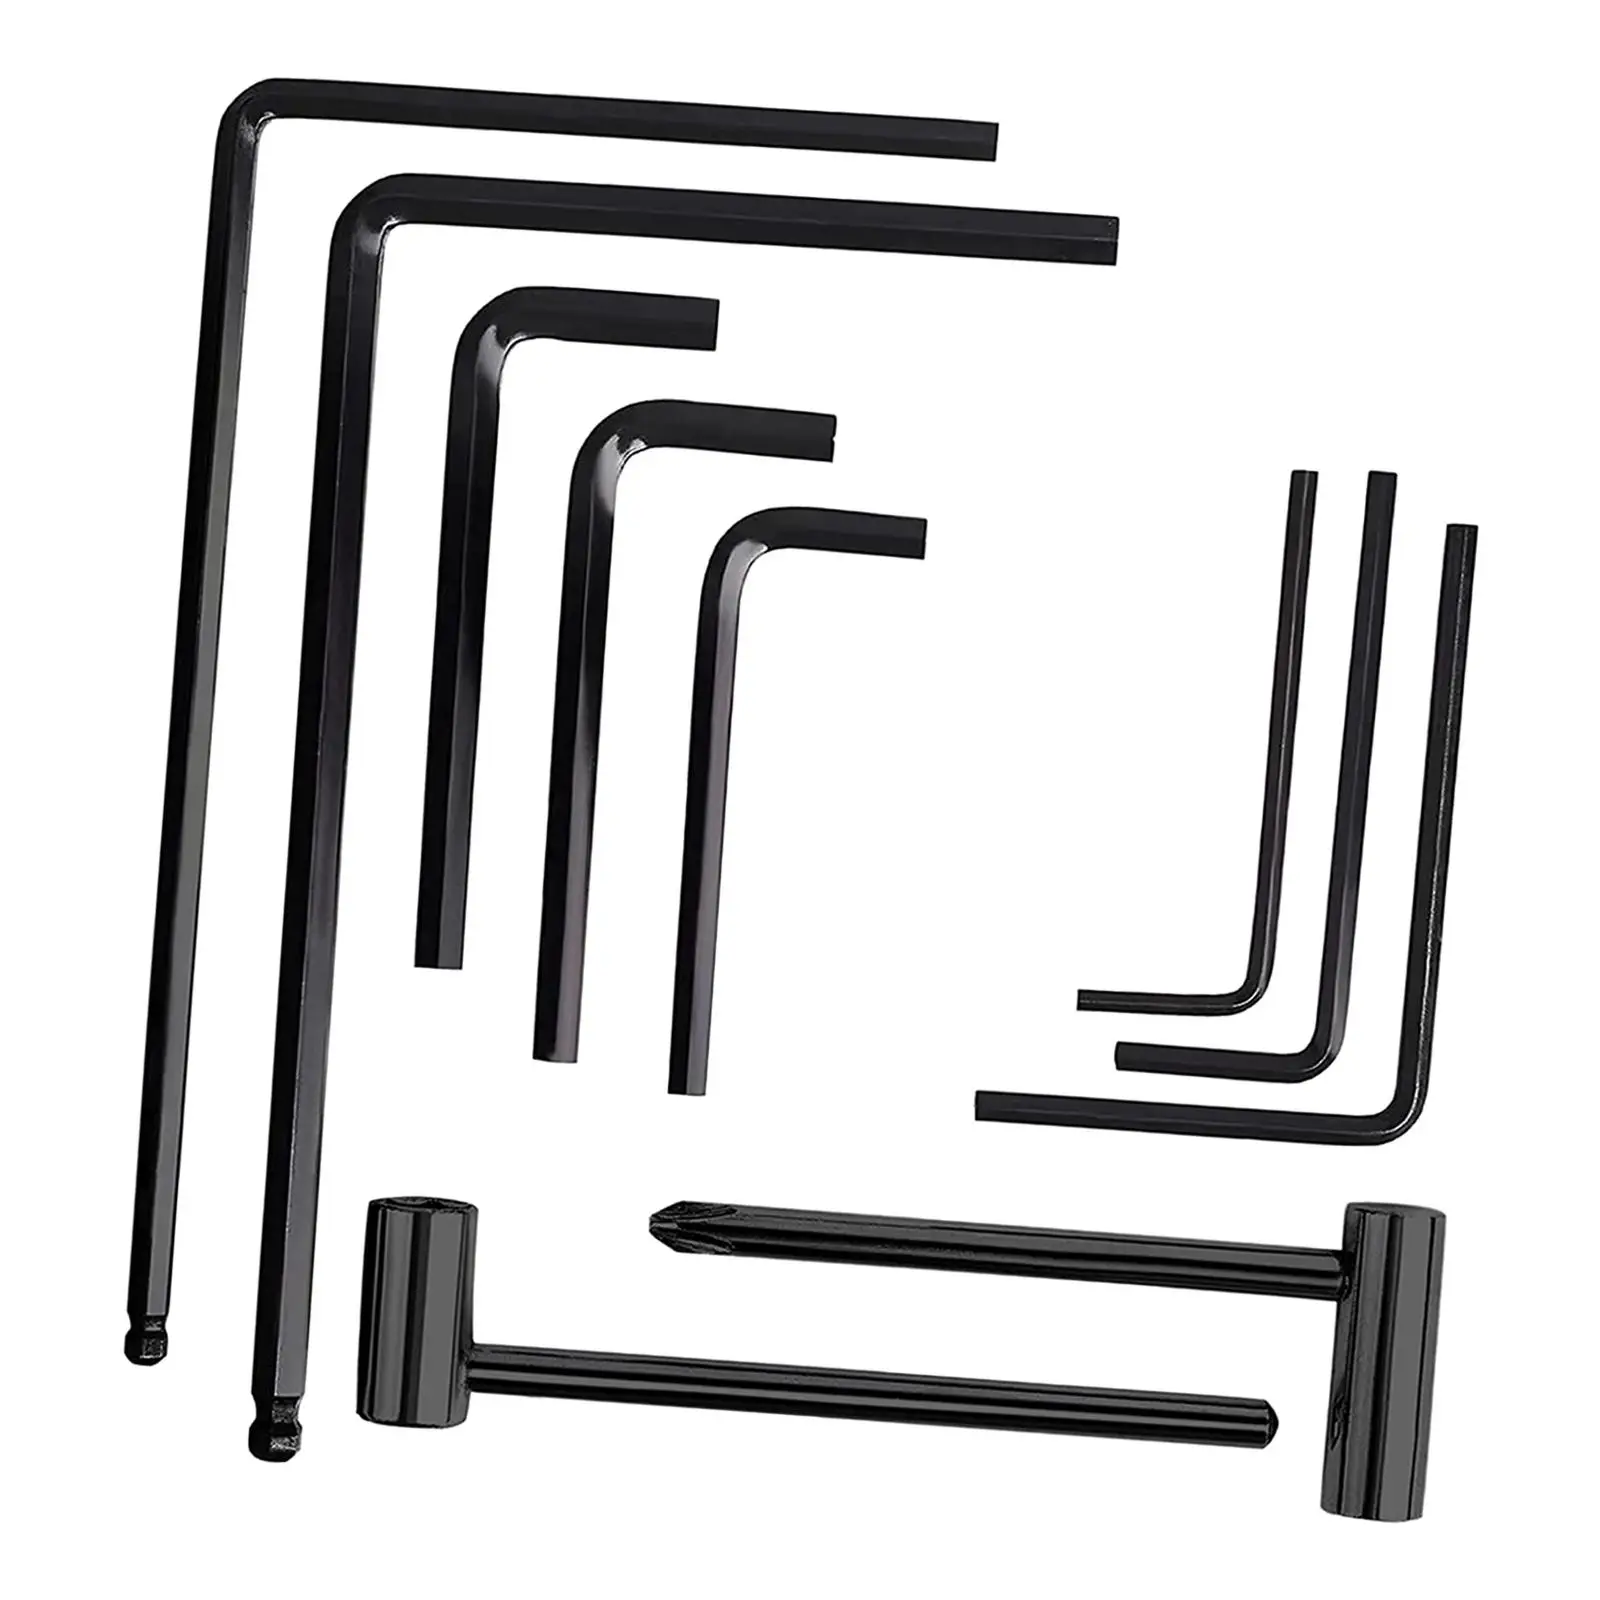 13 Pieces Guitar Allen Wrench Set Guitar Tool Part Guitar Wrench for Nut Locking Adjustment